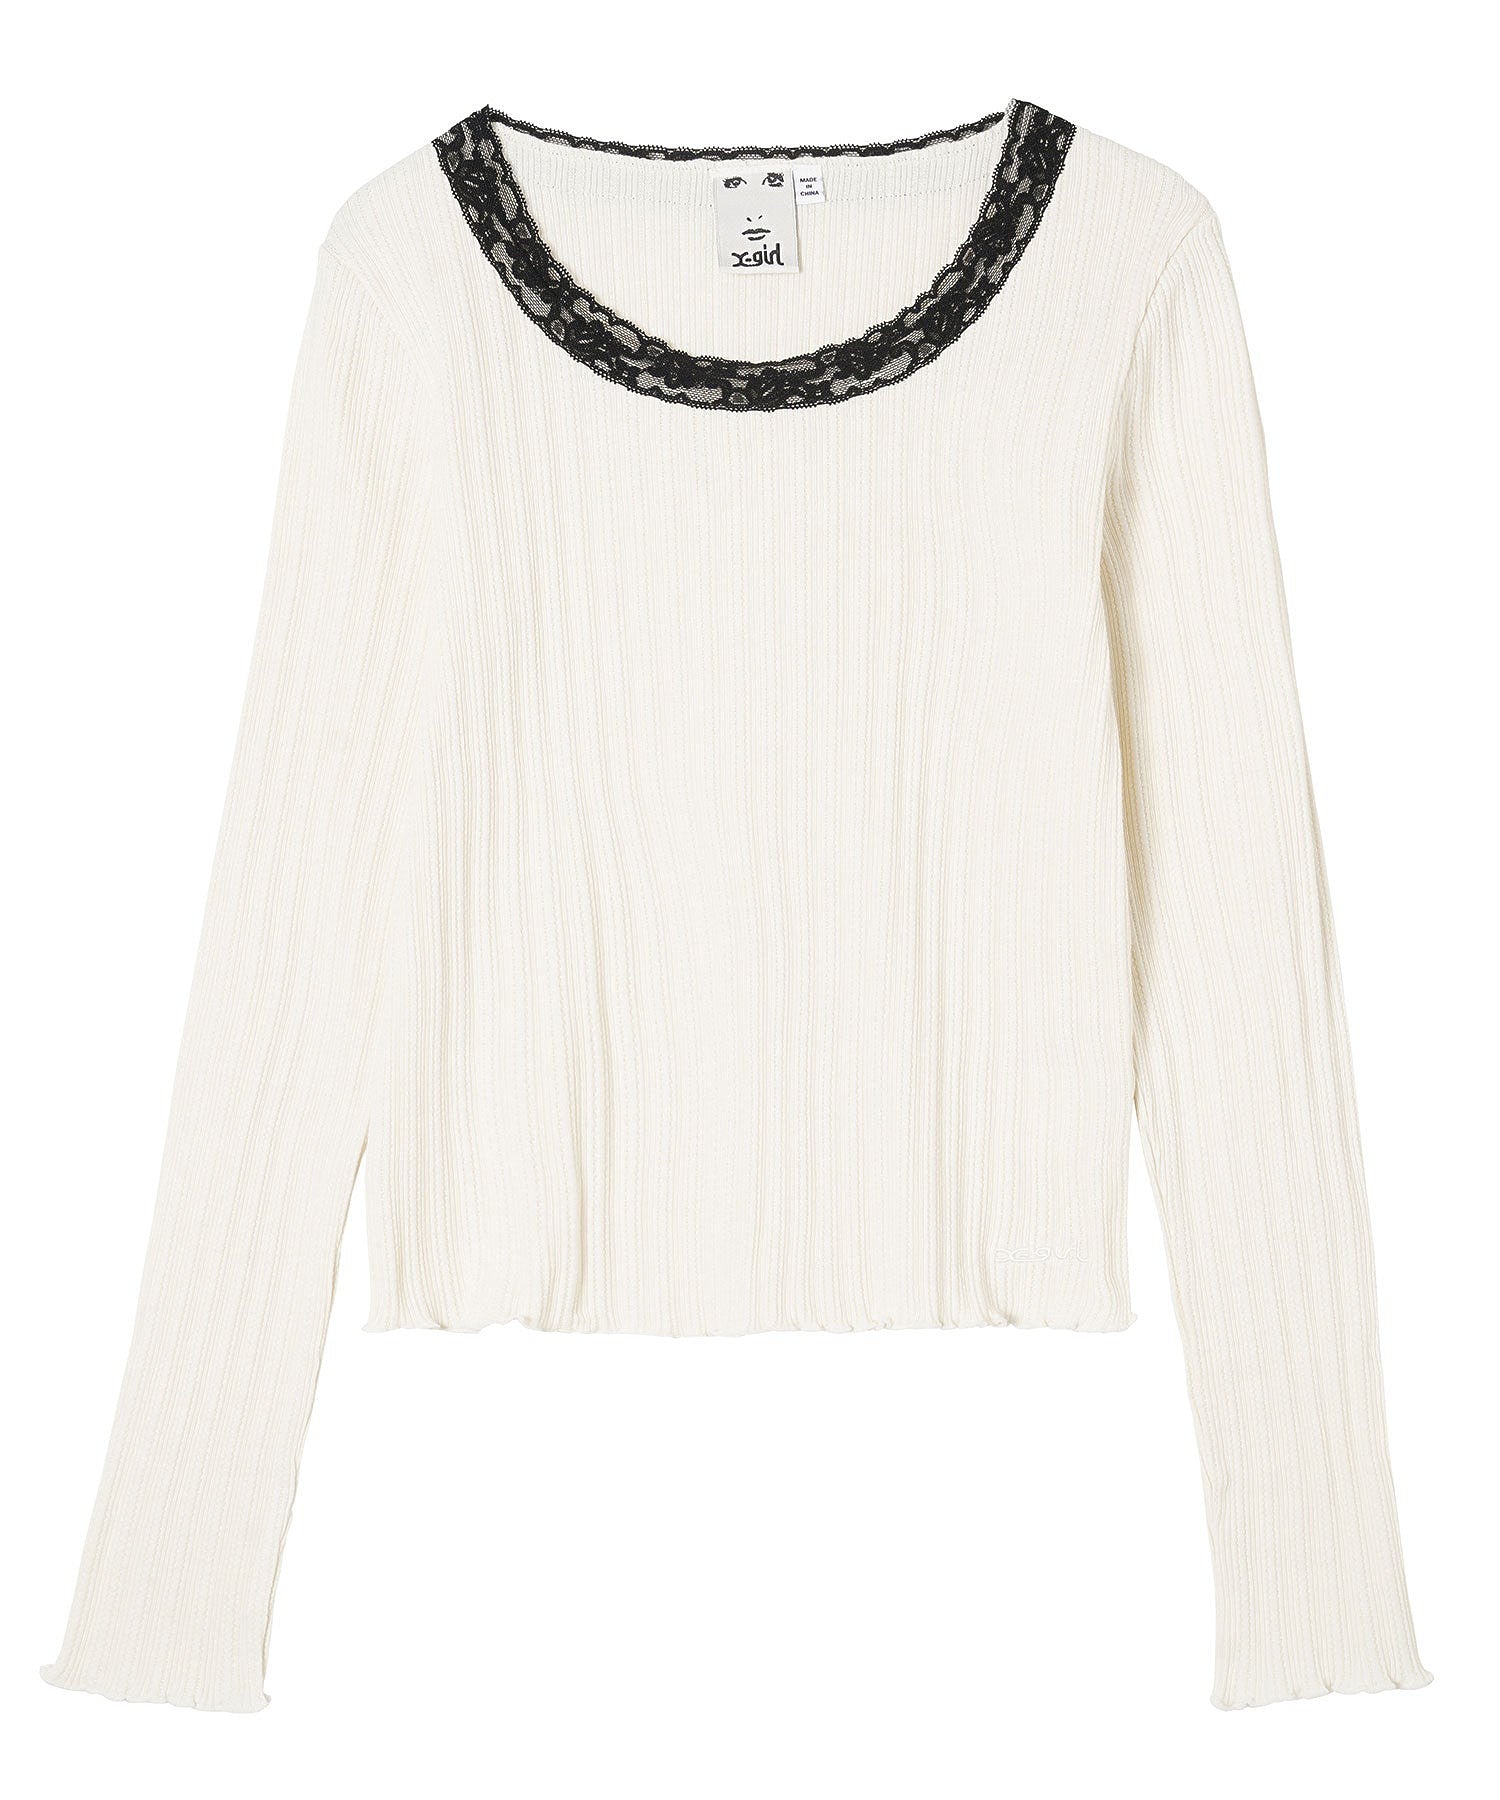 LACE L/S TOP X-girl